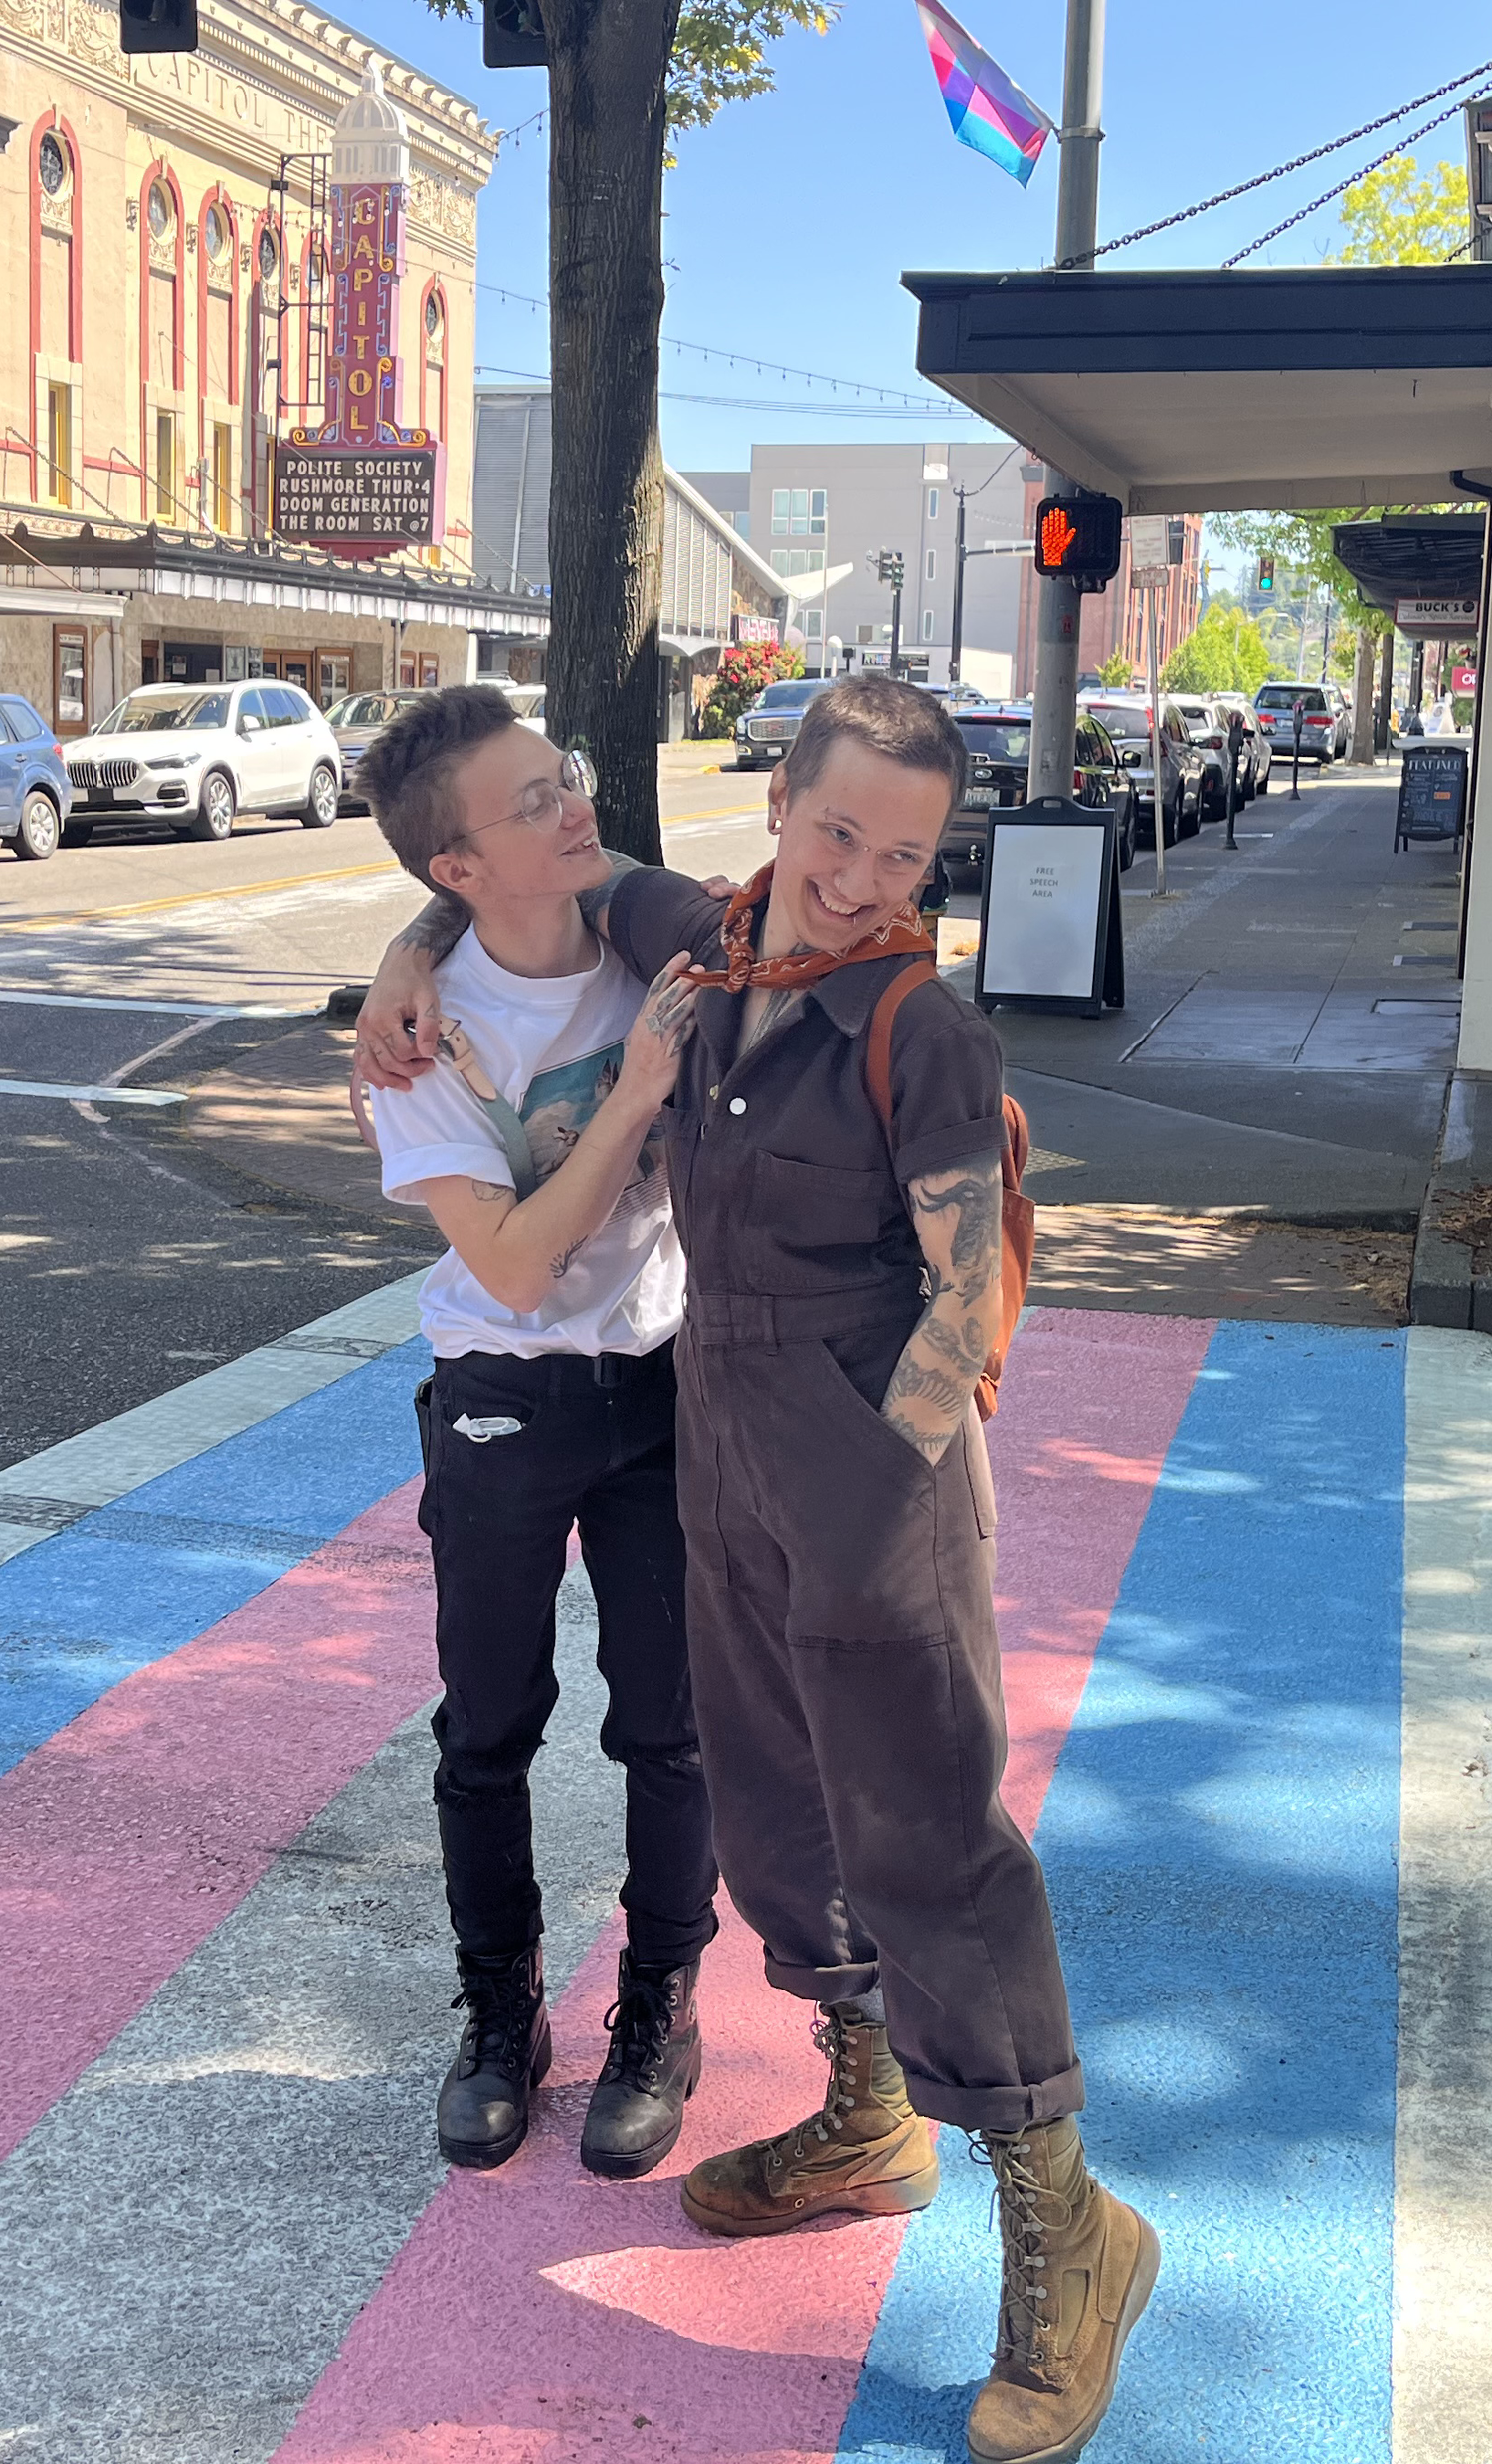 An image of Dimitri and his partner, Ren, with their arms around each other on a sidewalk painted as the trans flag.